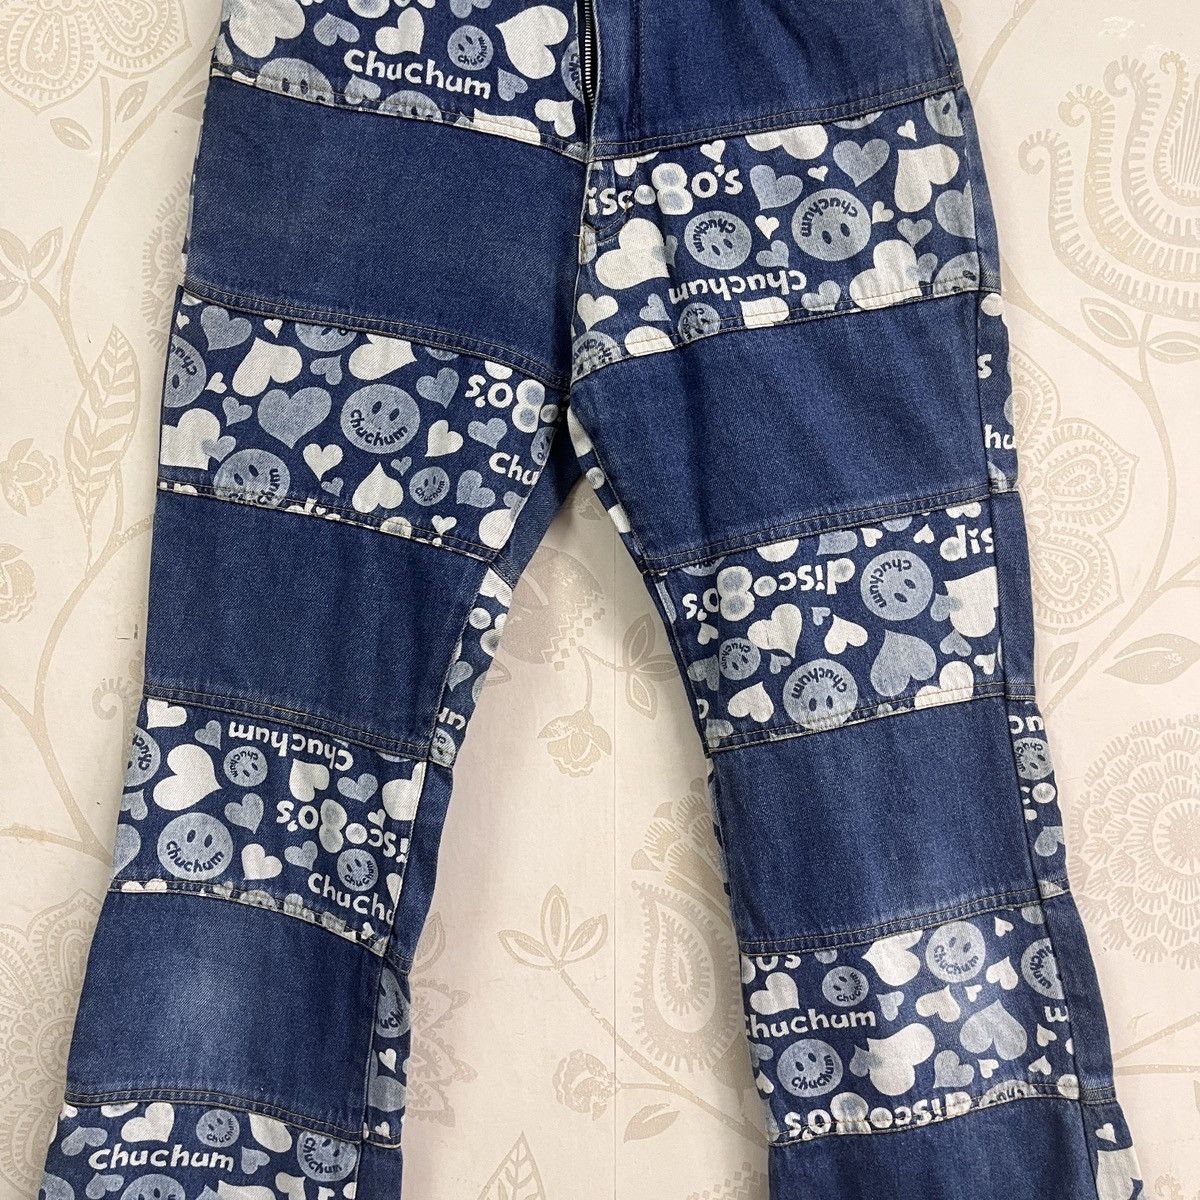 Vintage - Hysteric Flared Chuchum Full Printed Patches Denim Jeans - 9